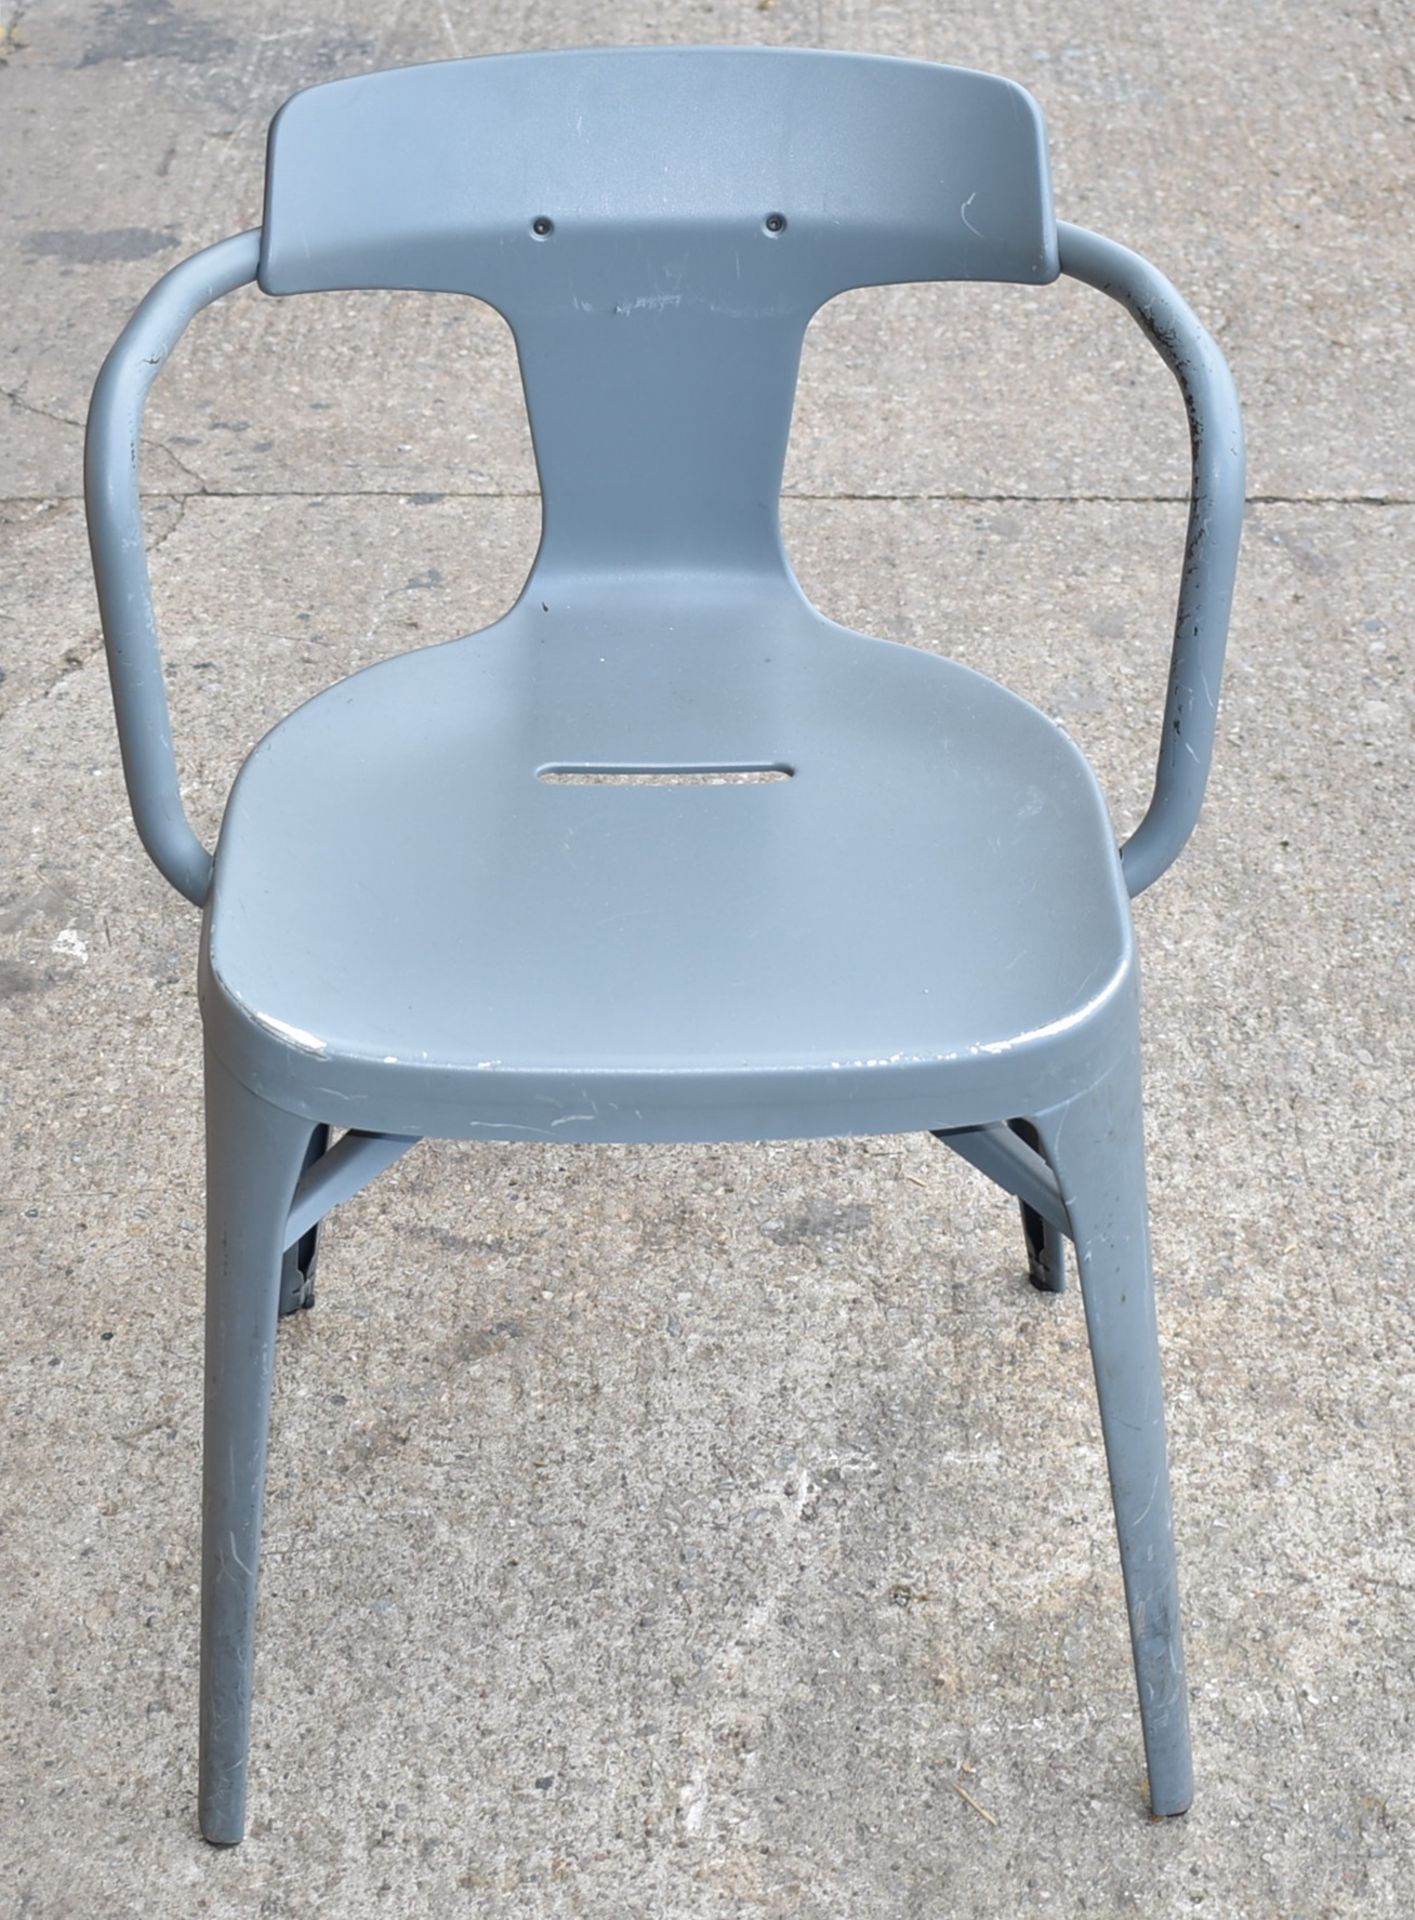 4 x Tolix Outdoor Bistro Stacking Armchairs Designed By Patrick Norguet - RRP £1,548 - Stainless Ste